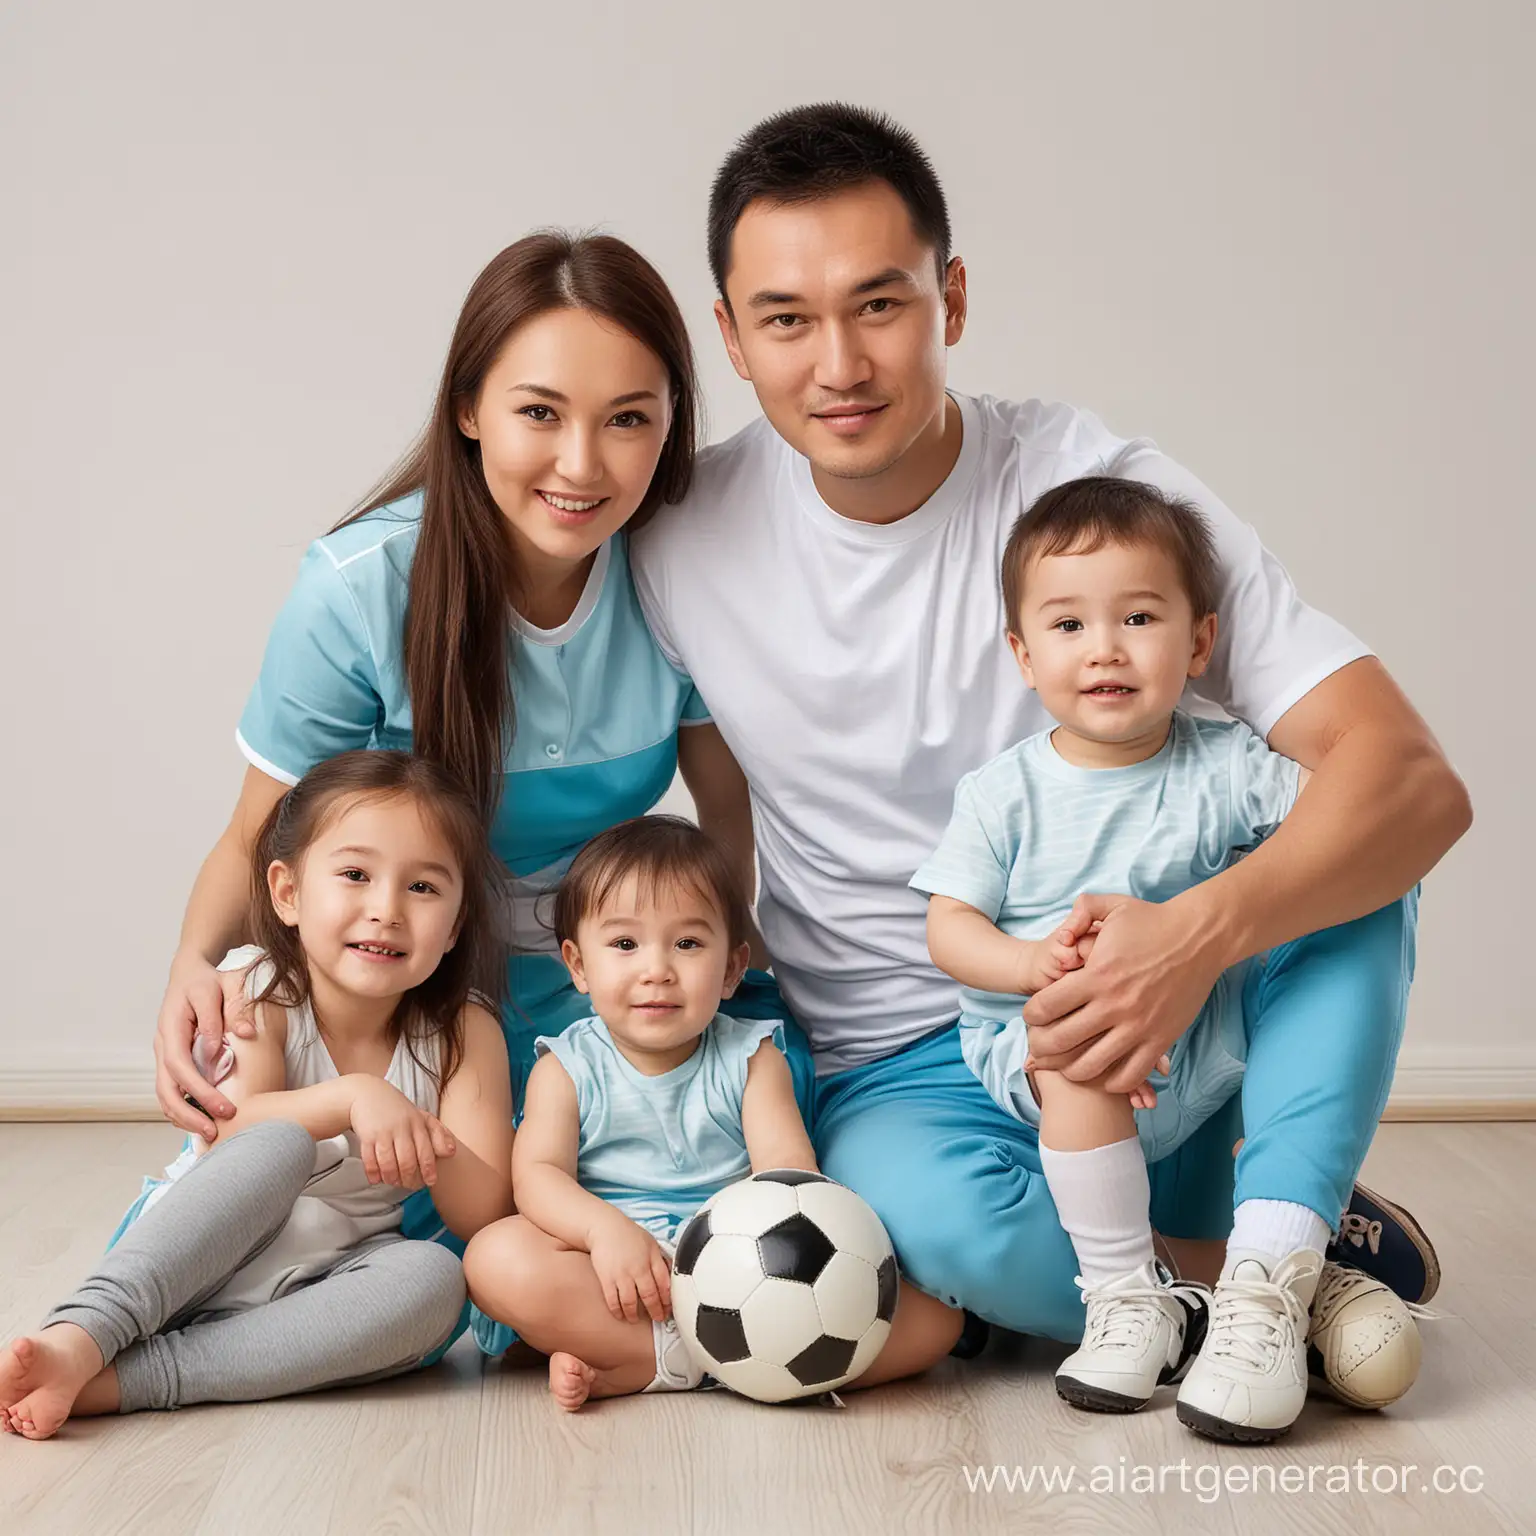 young kazakh family, 4 people - mother, father, son and little daugter, all family sitting on the floor. A football ball is lying near feet. White background